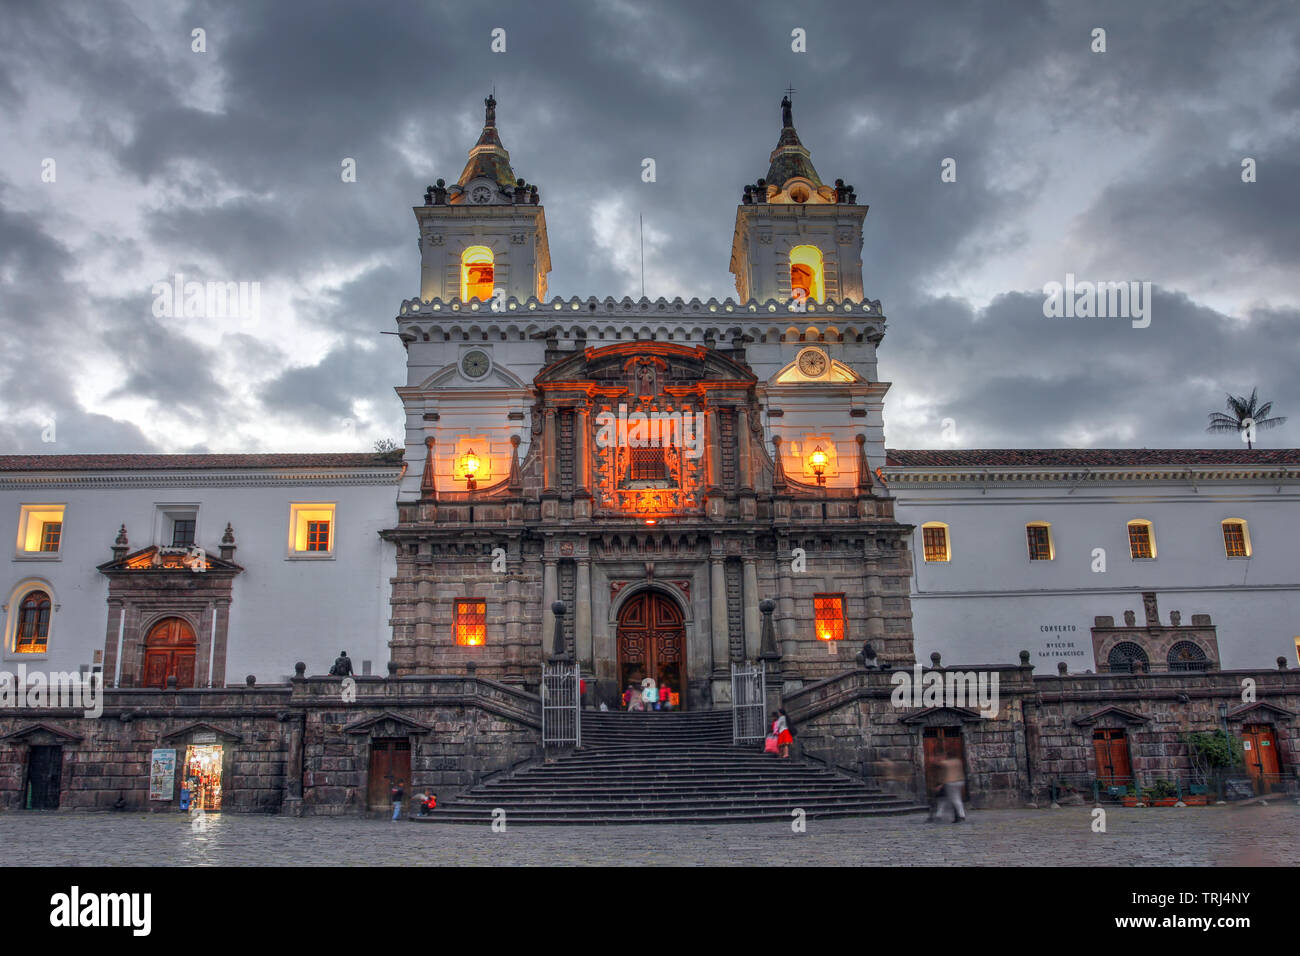 Twilight view of the Church and Monastery of San Francisco de Quito, the capital of Ecuador from the town square bearing the same name. Stock Photo